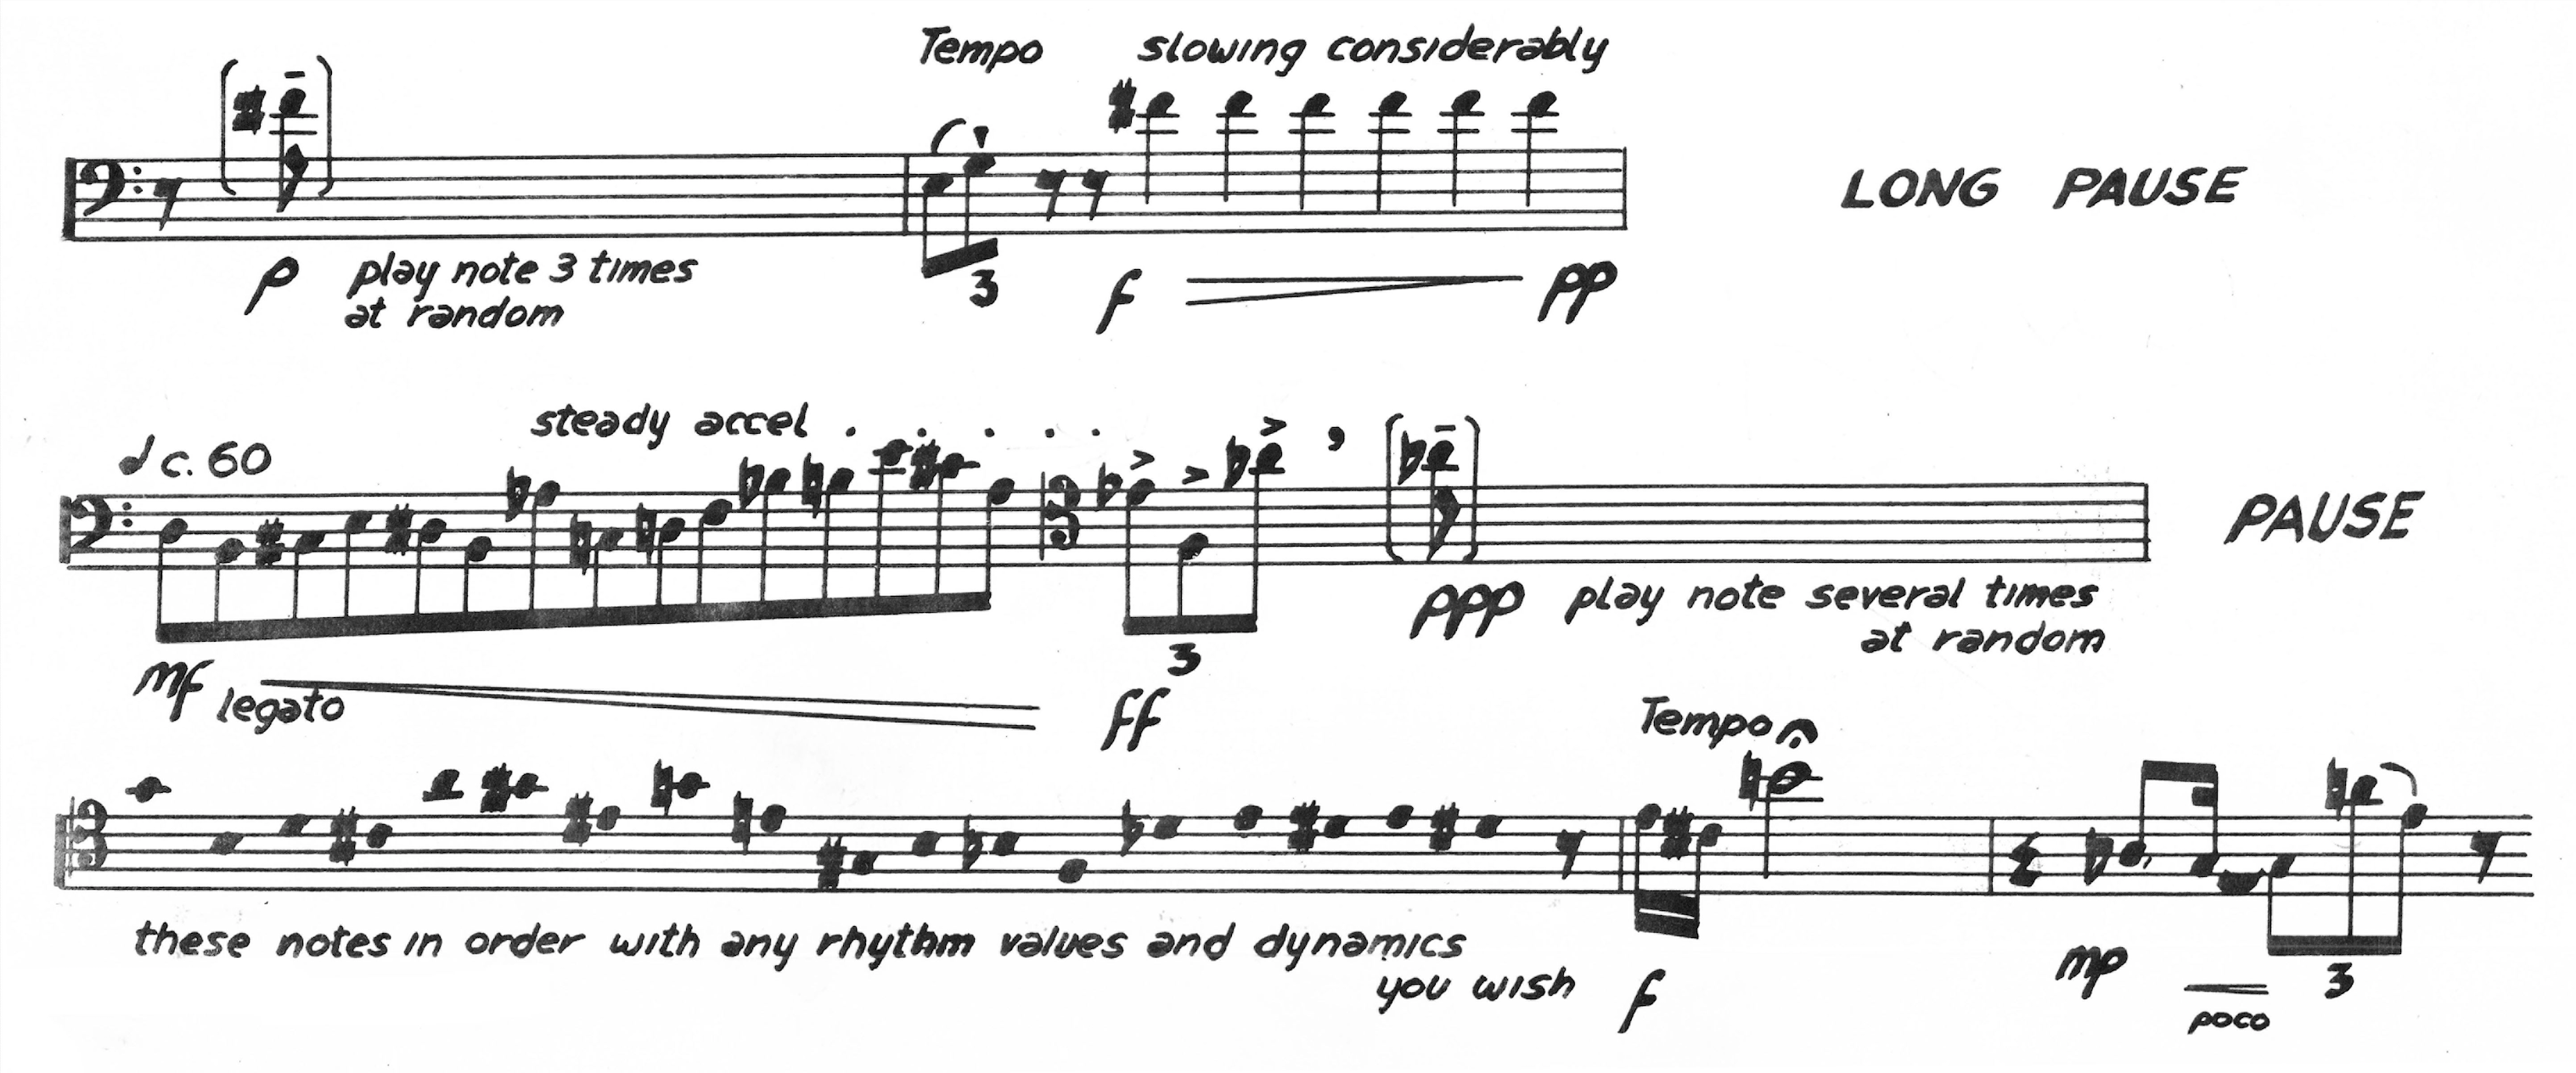 Excerpt from Sonata for Solo Trombone by Barney Childs